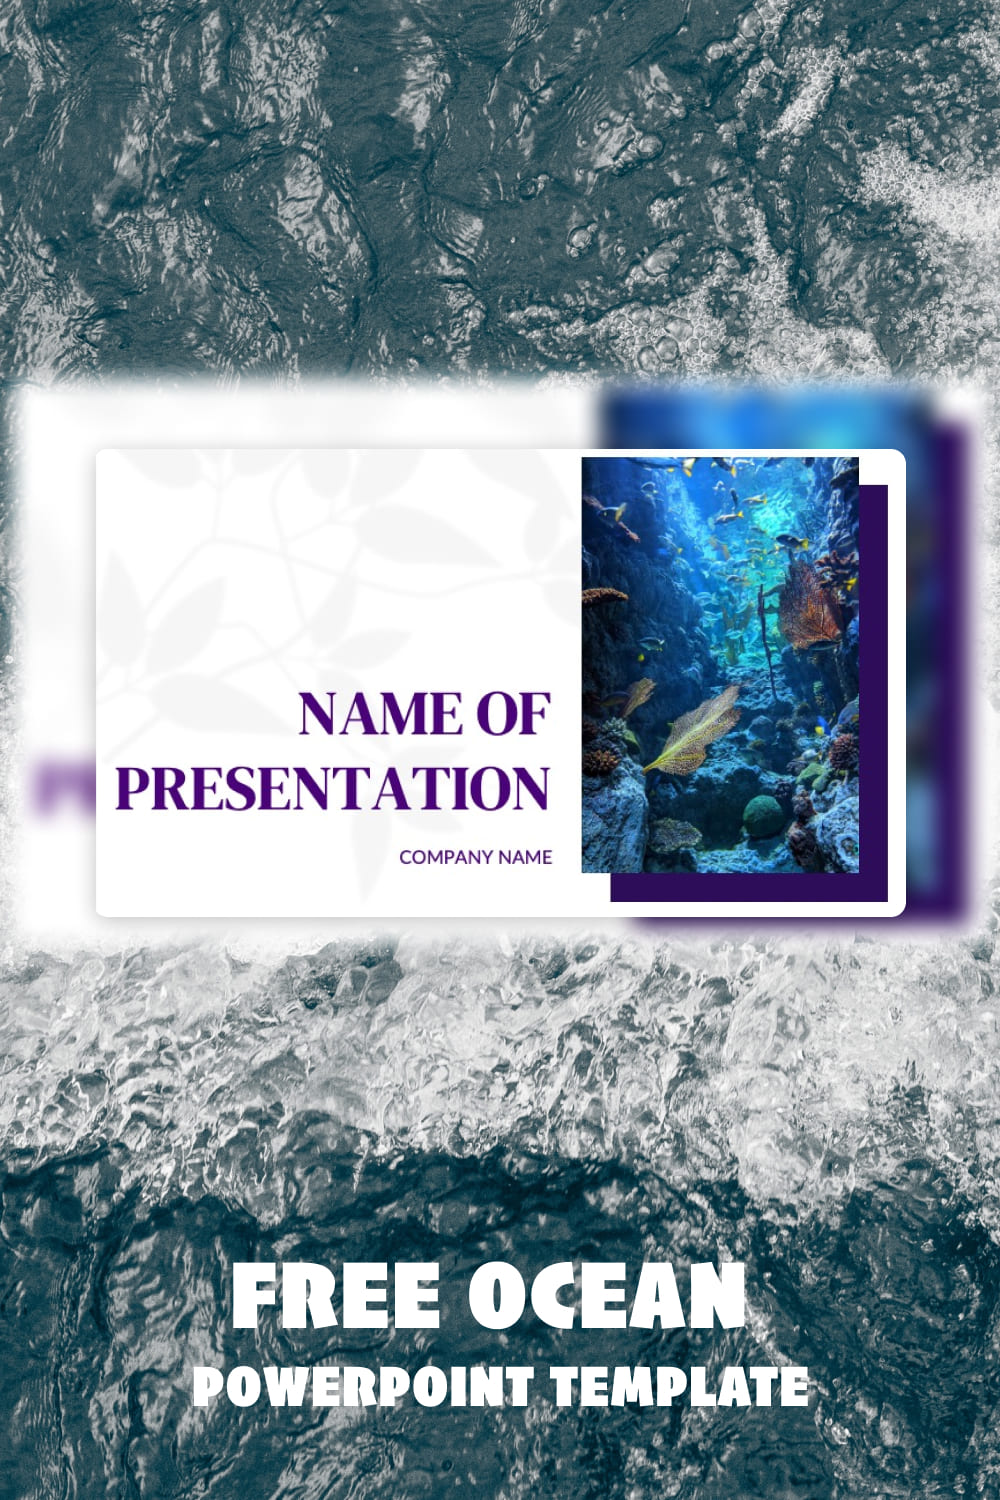 Free ocean powerpoint template - pinterest image preview.